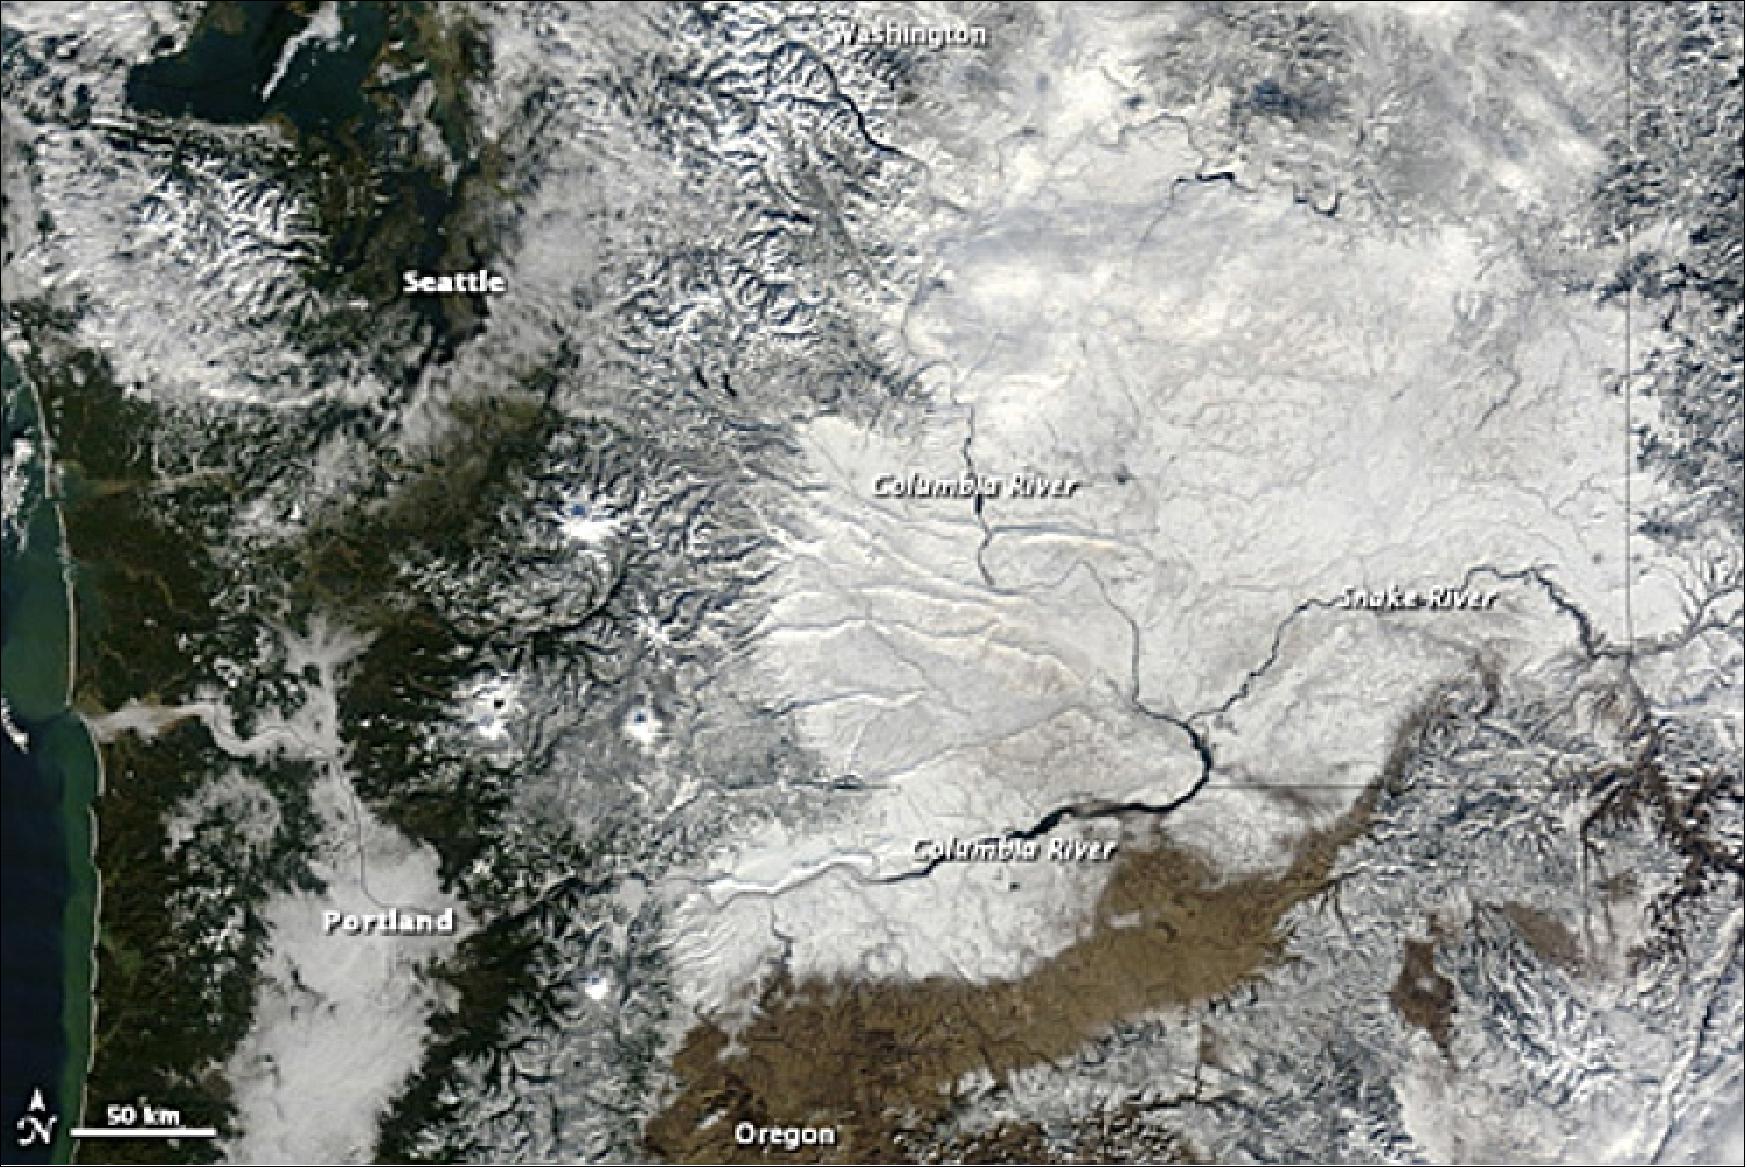 Figure 117: Natural color image of MODIS acquired on January 23, 2012 showing a winter storn in the Pacific Northwest (image credit: NASA)